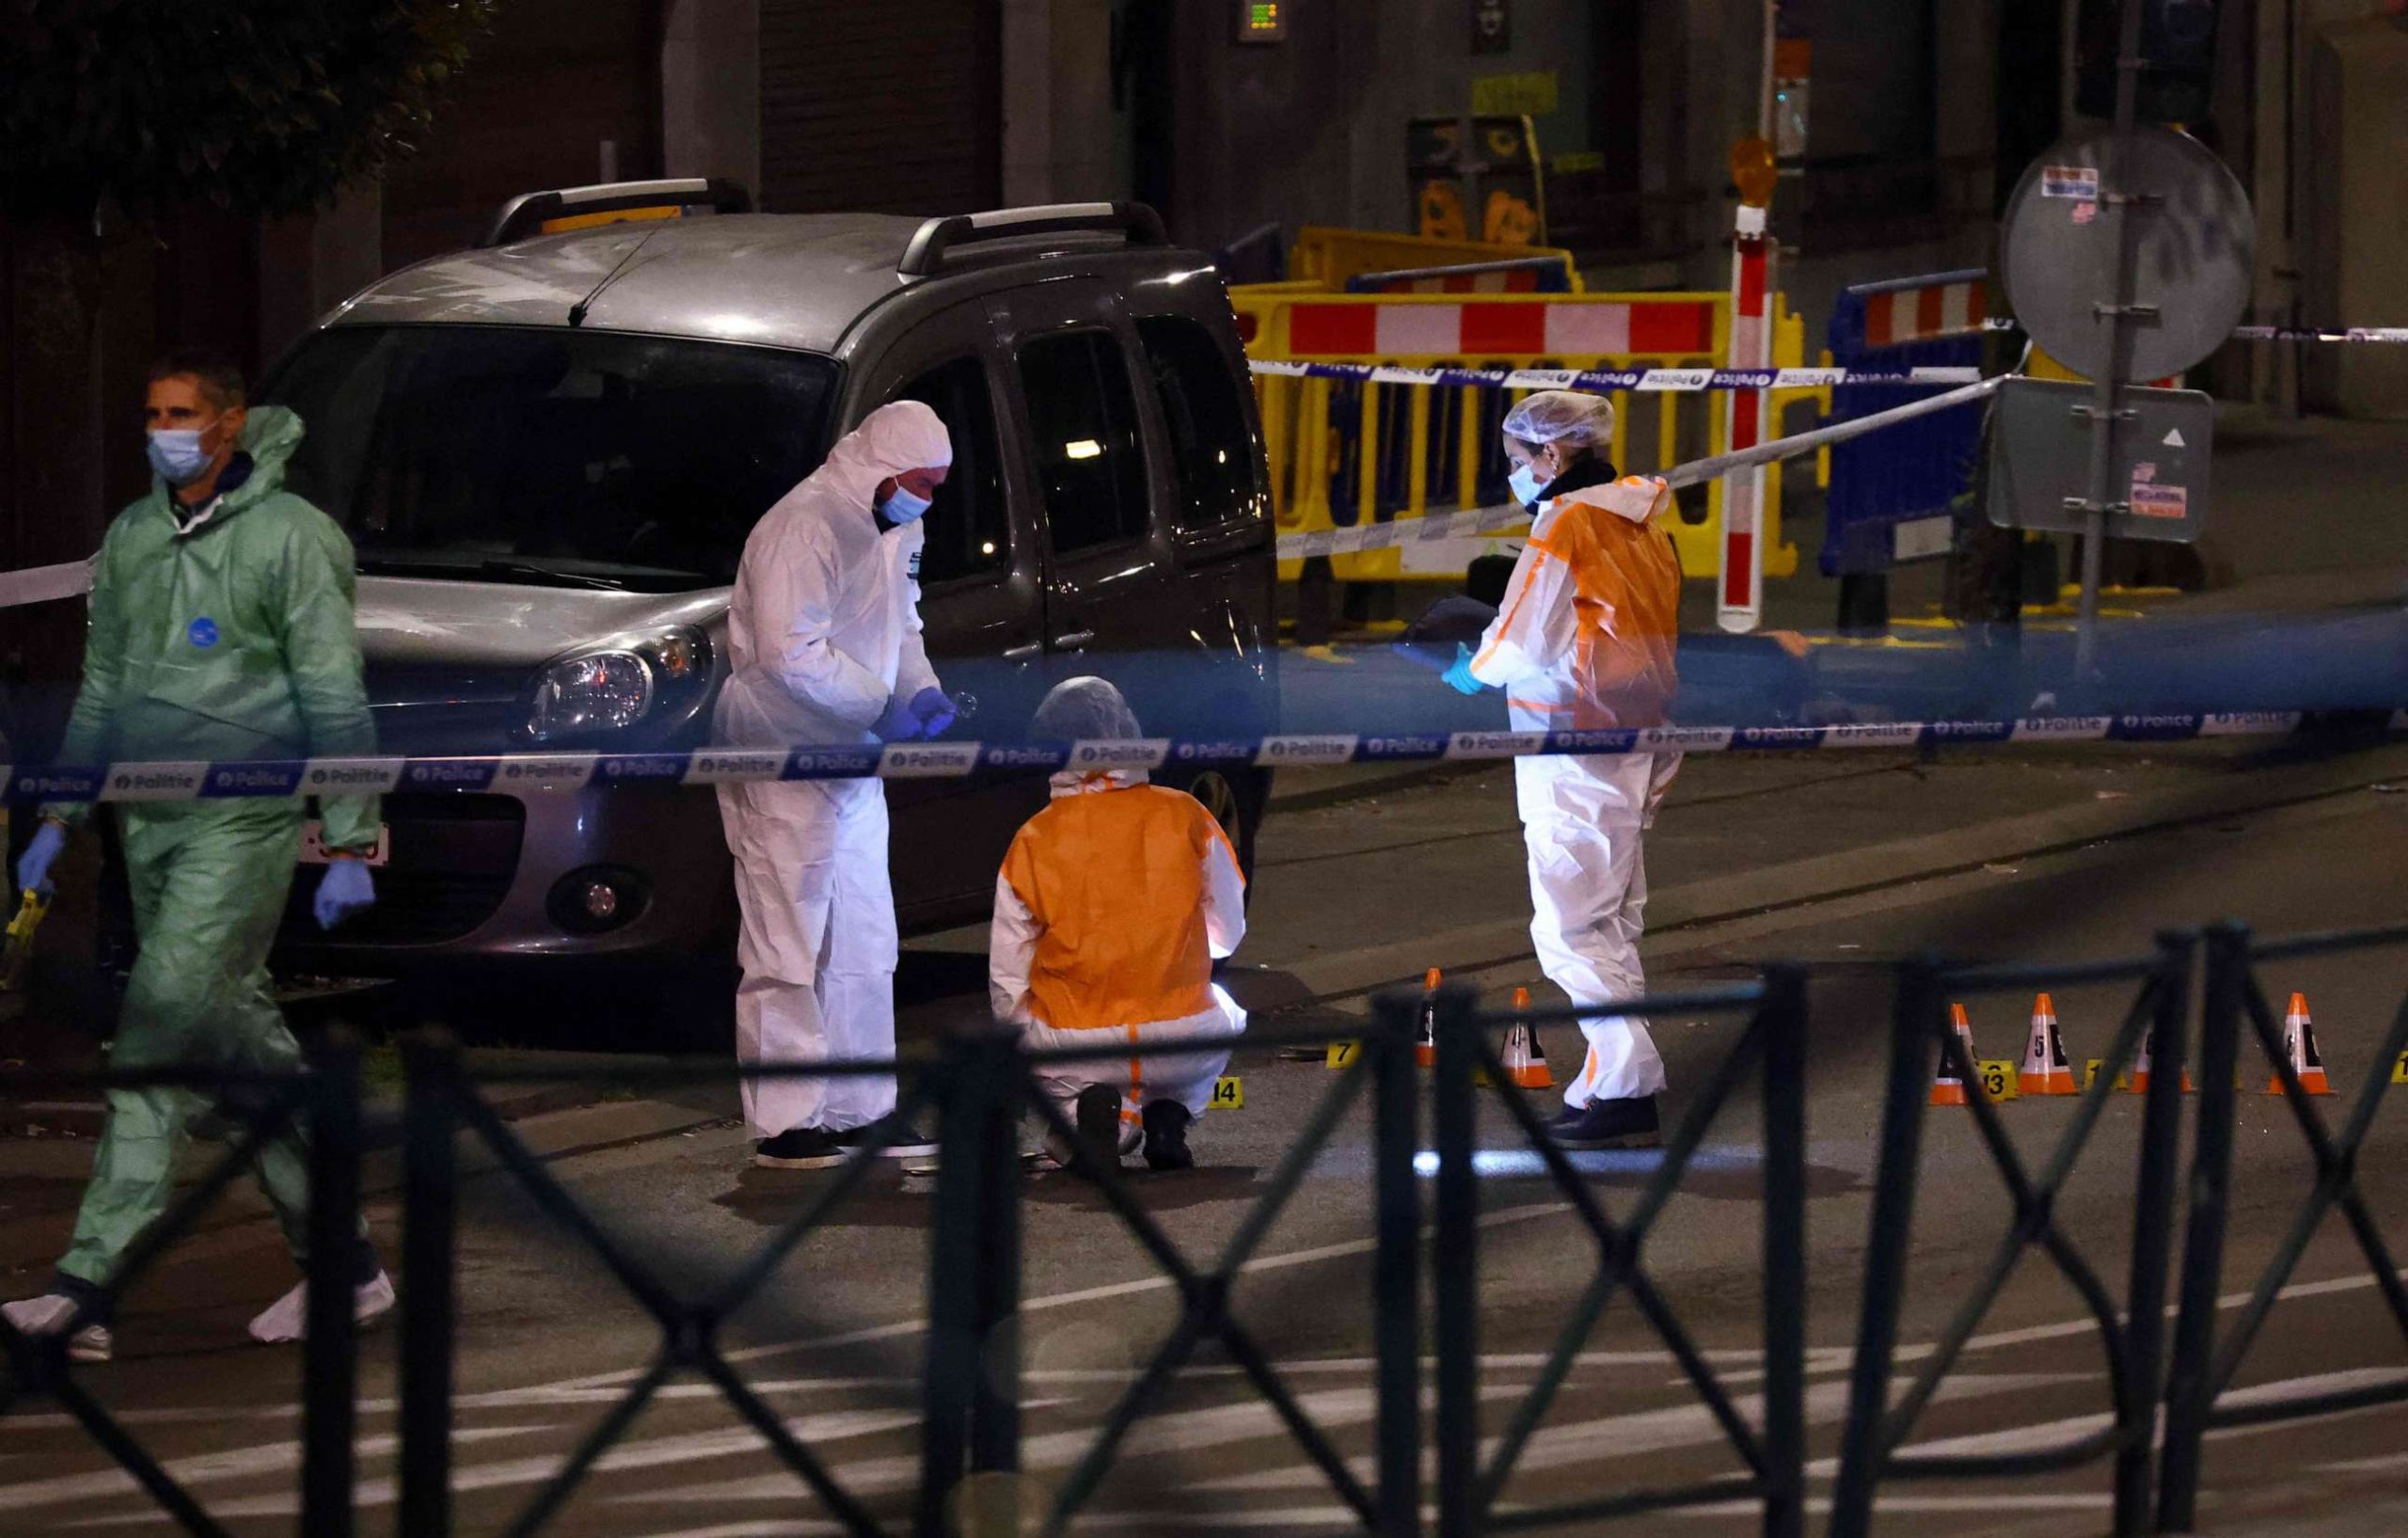 Police sources confirm that the Brussels shooter responsible for the deaths of 2 Swedish soccer fans in an apparent act of terrorism has been fatally shot.